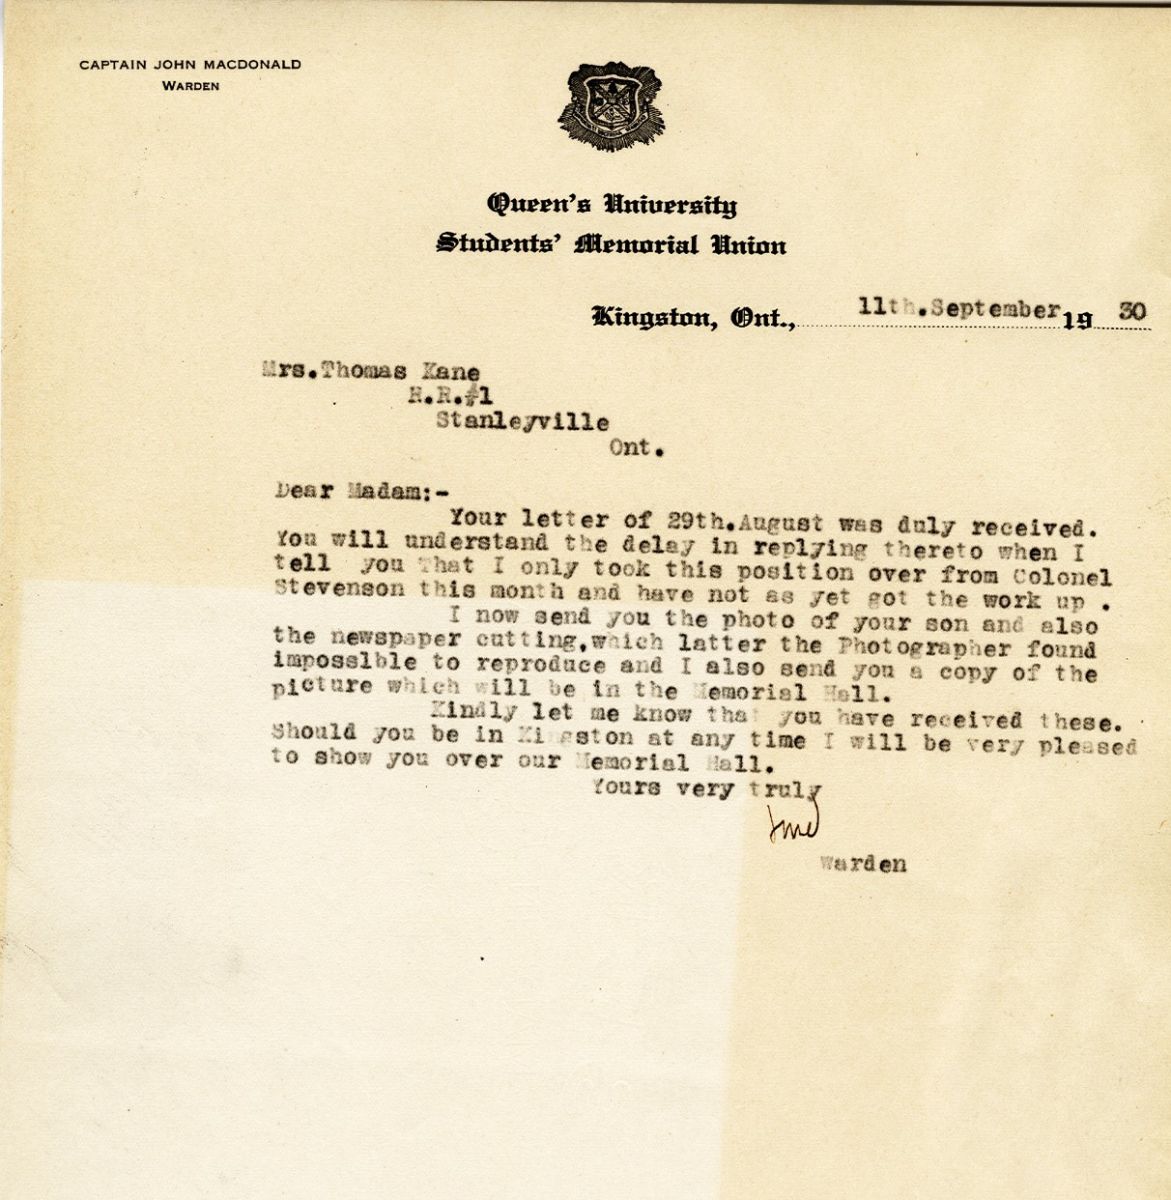 letter from the Warden to Mrs. Thomas Kane, 11th September 1930